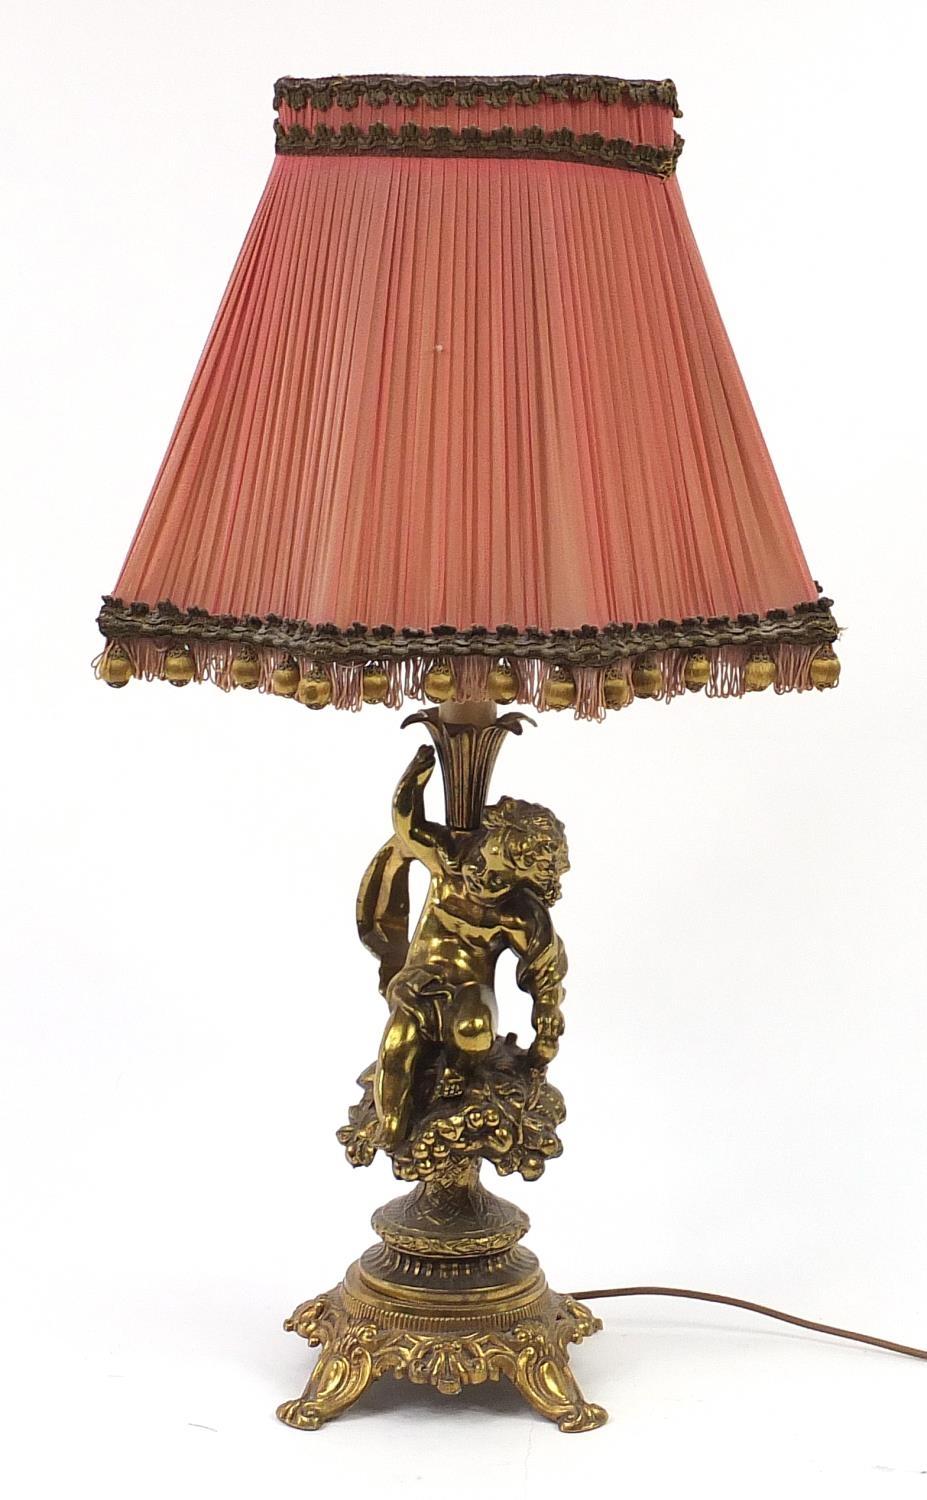 Ornate gilt metal Putti design table lamp with silk lined shade, 71cm high